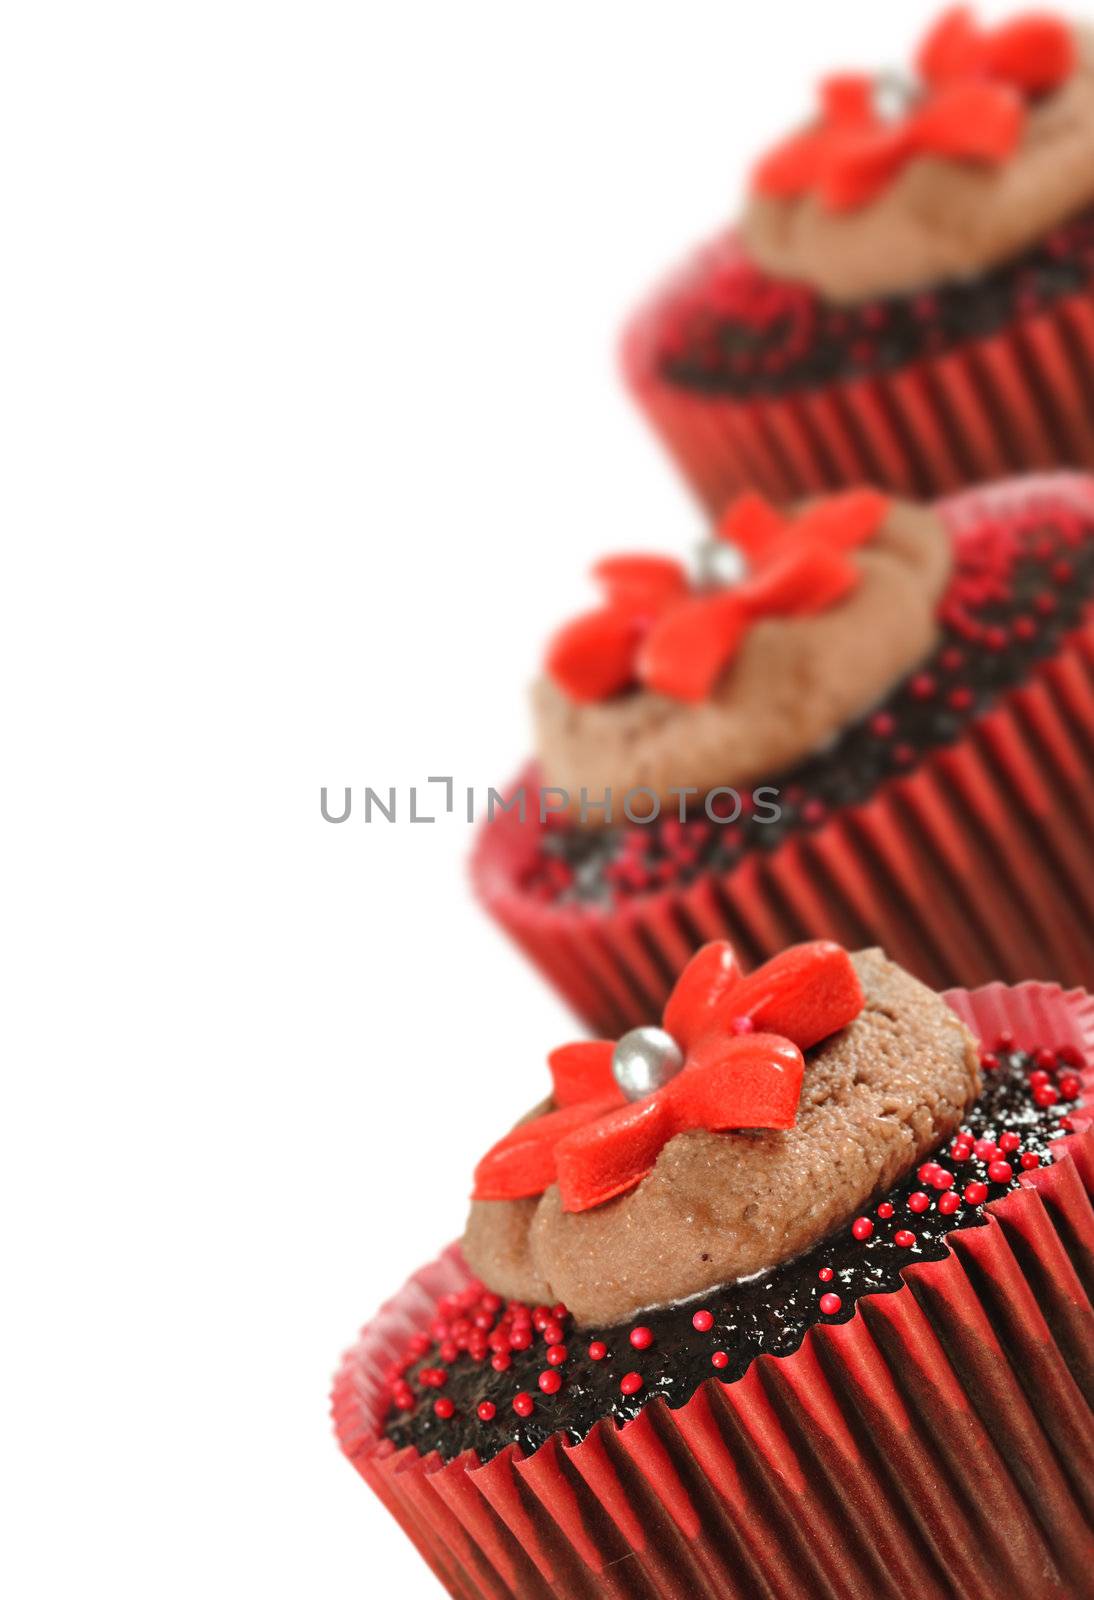 Delicious chocolate cupcakes in red